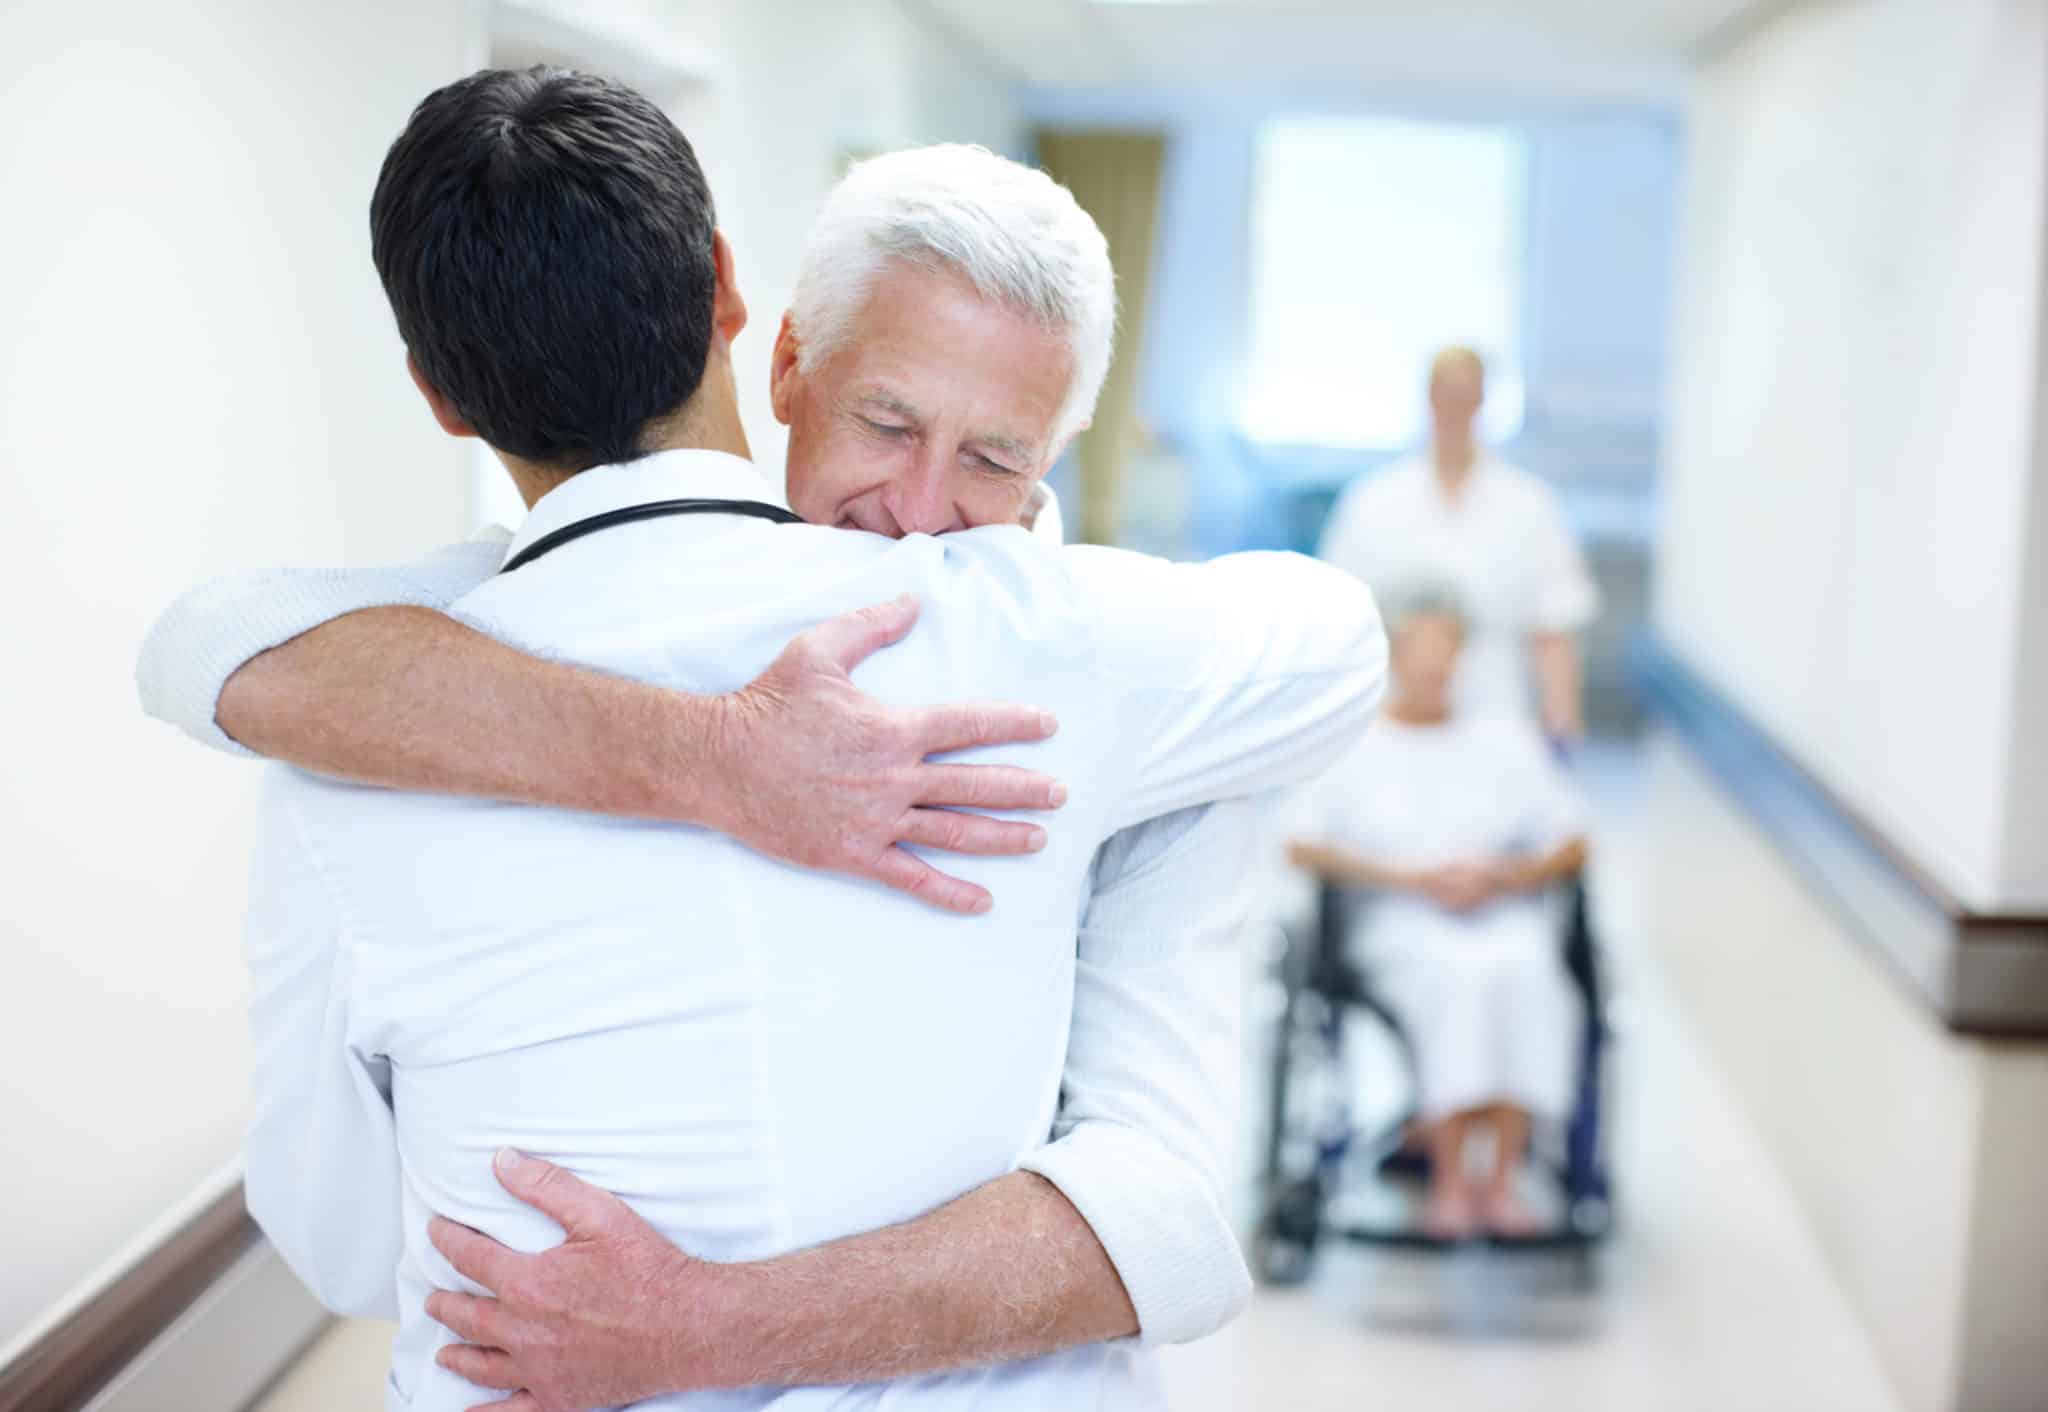 Two men in embracing each other in the hospital hall